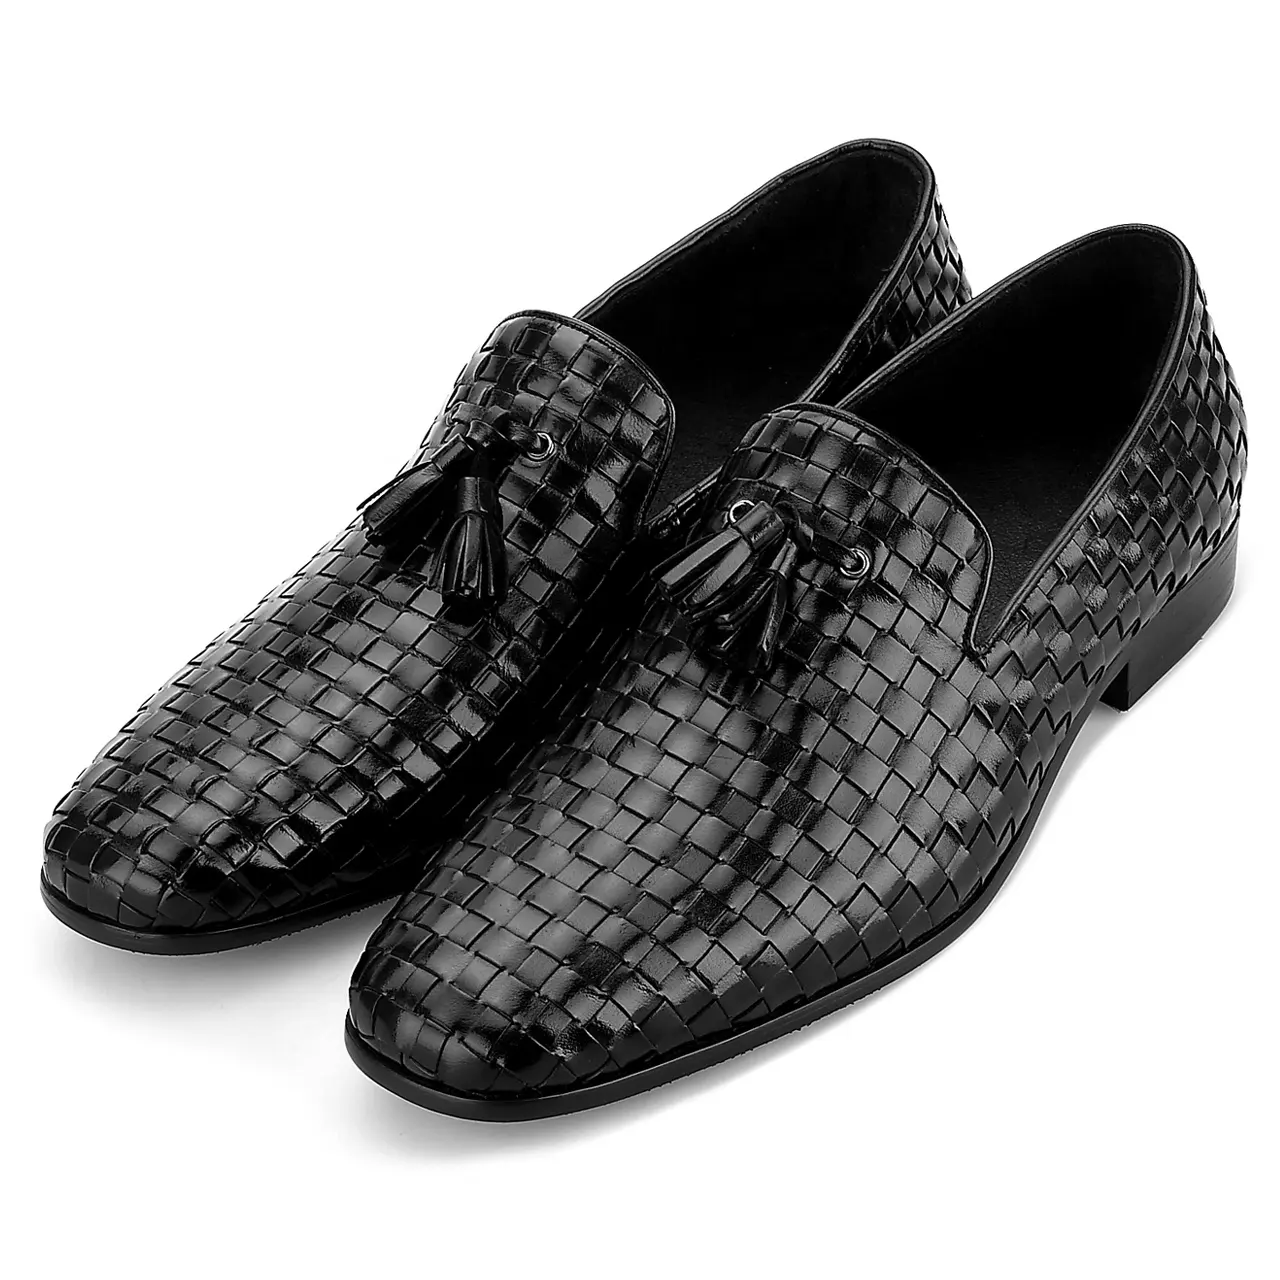 New 2020 Professional BV Weave Leather Business Shoes Comfortable Causal Men's Loafers Shoes